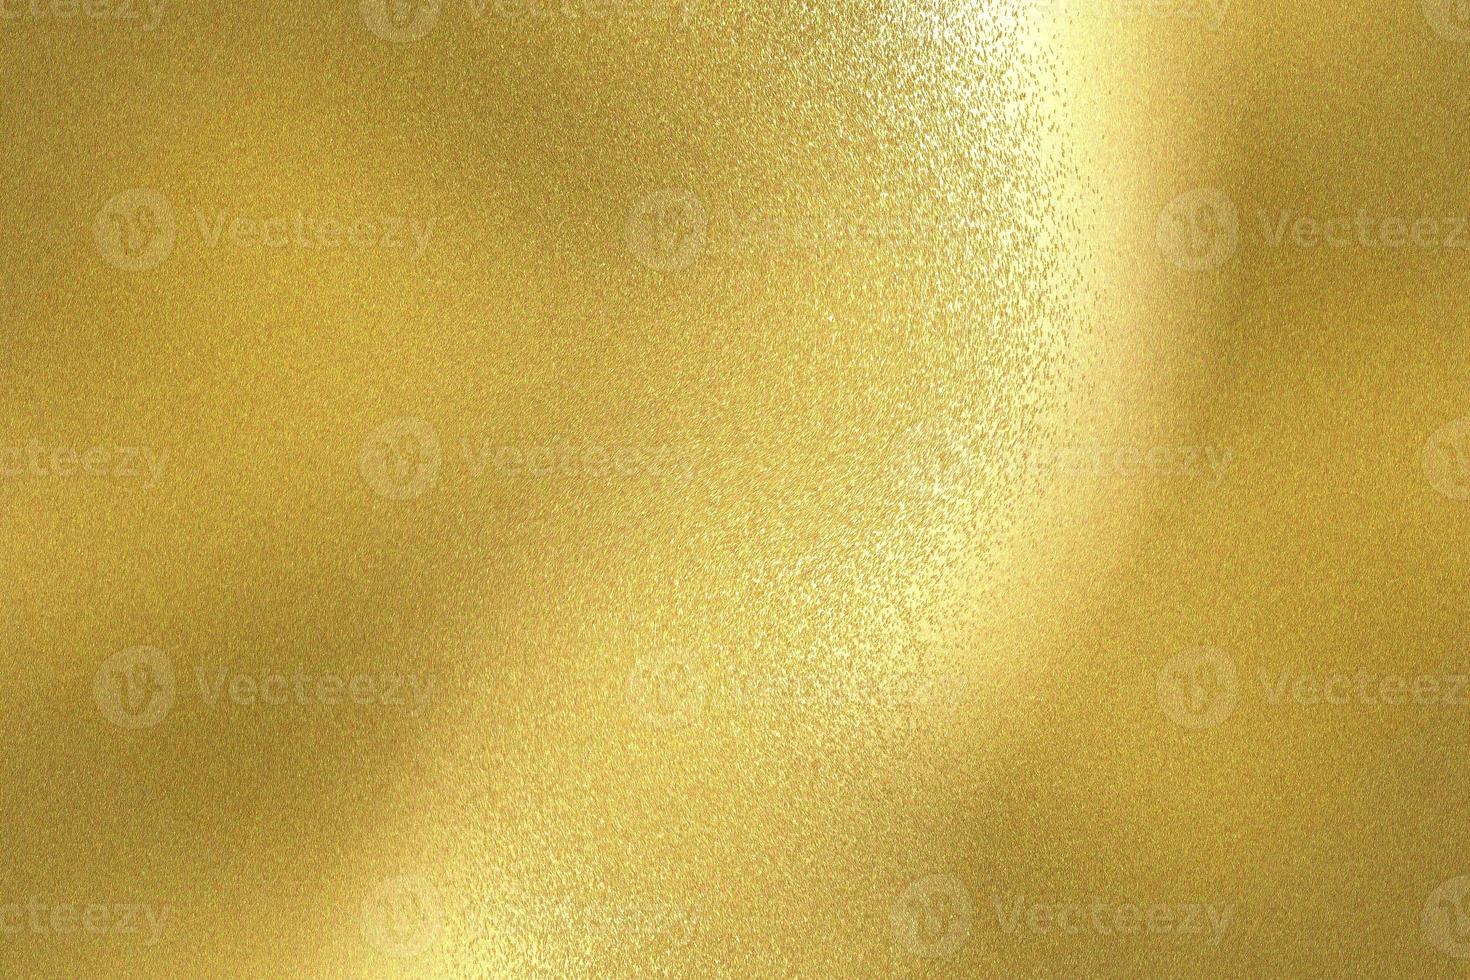 Reflection of wave gold metal wall, texture background photo